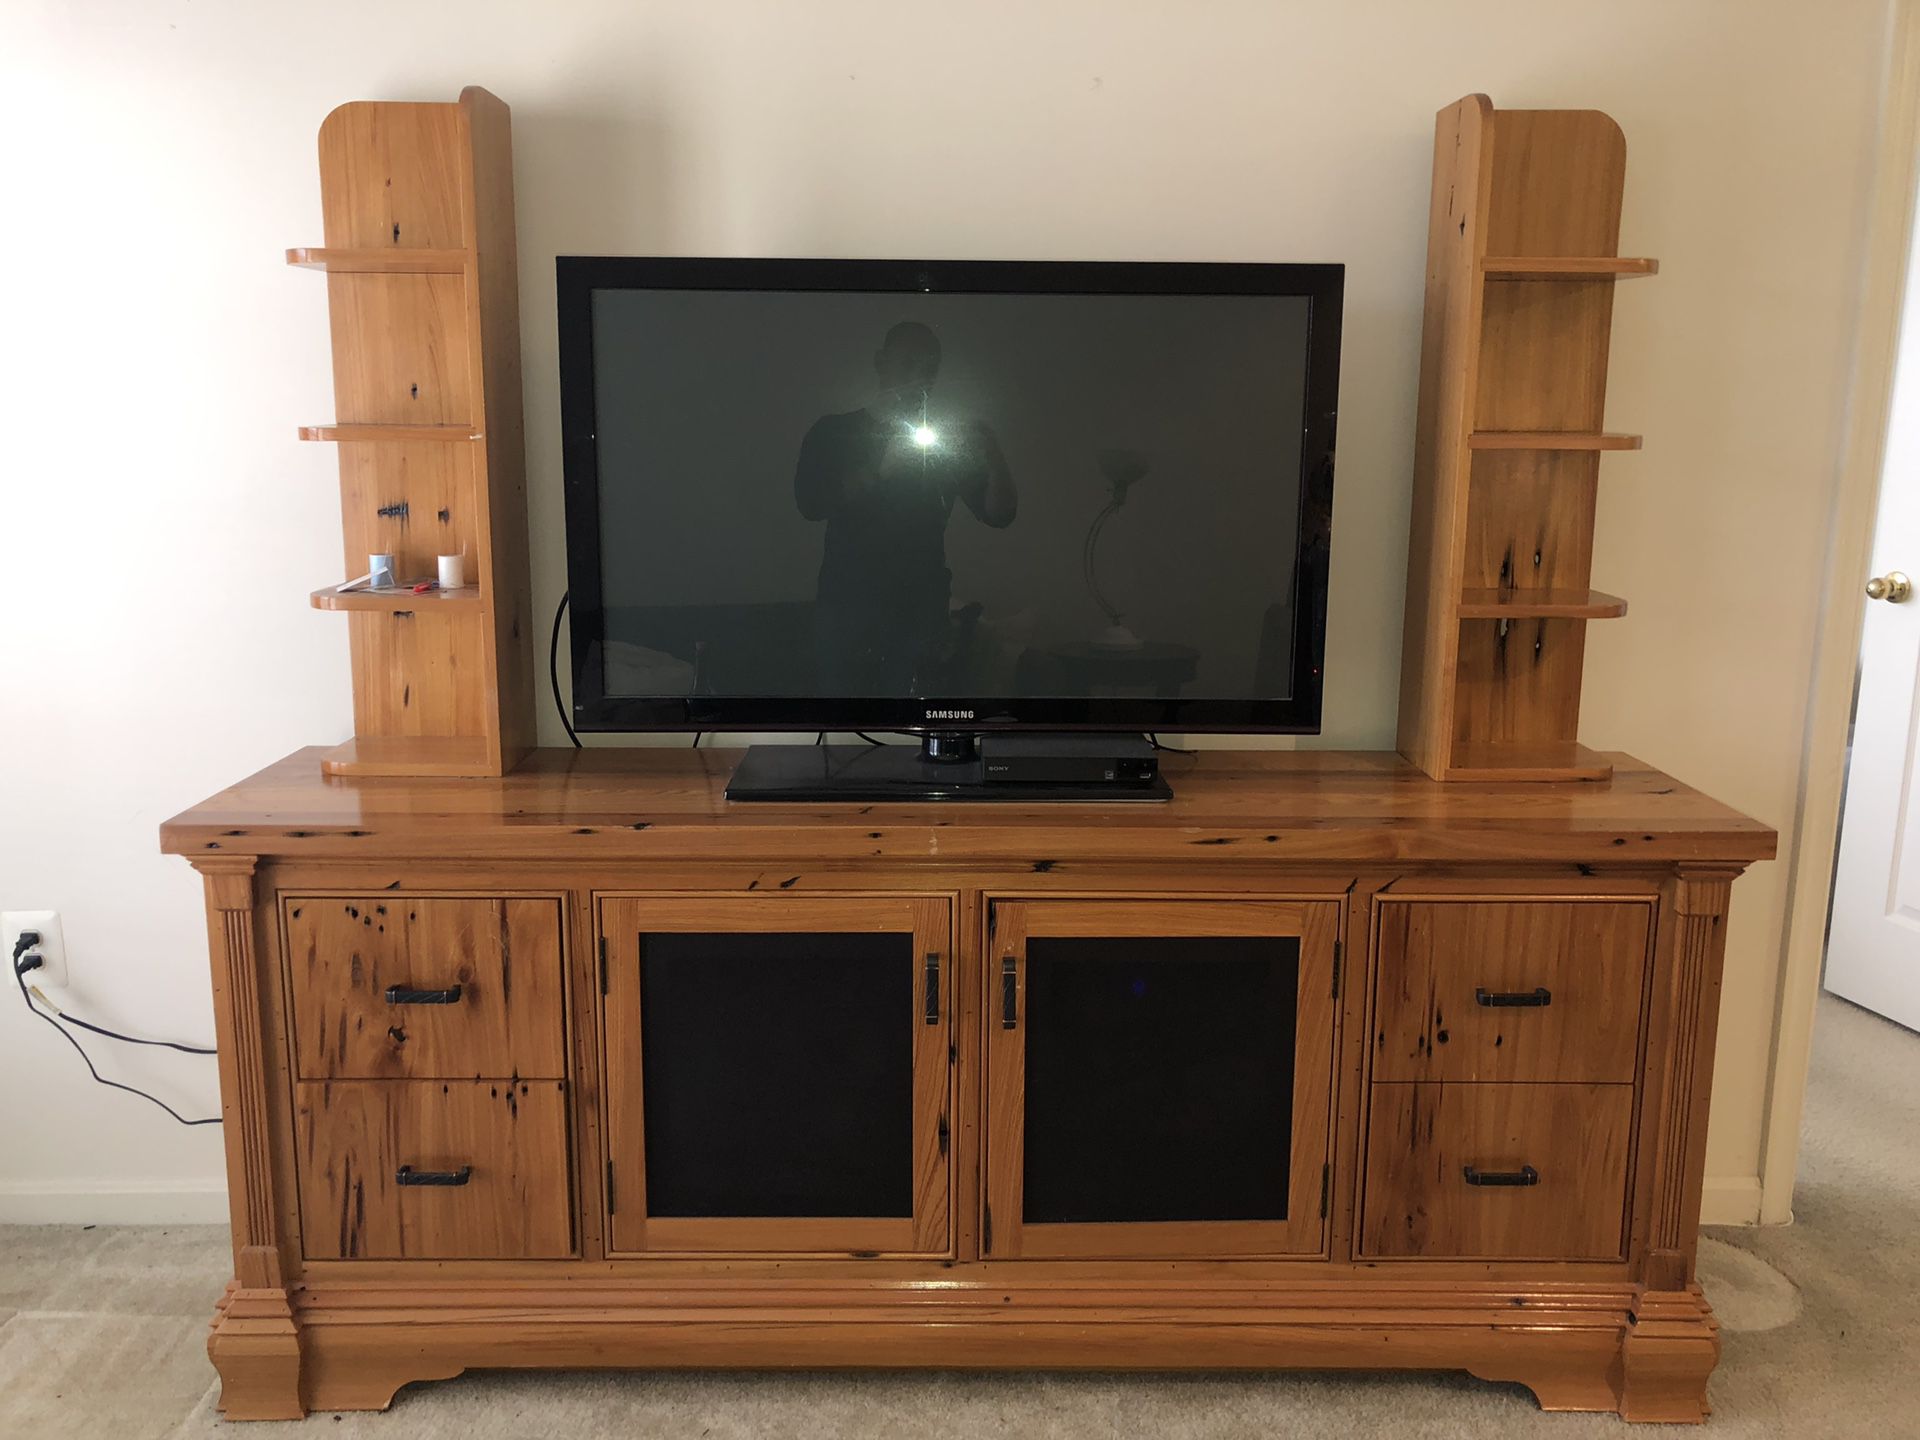 Real maple wood tv stand with side dressers (FREE)